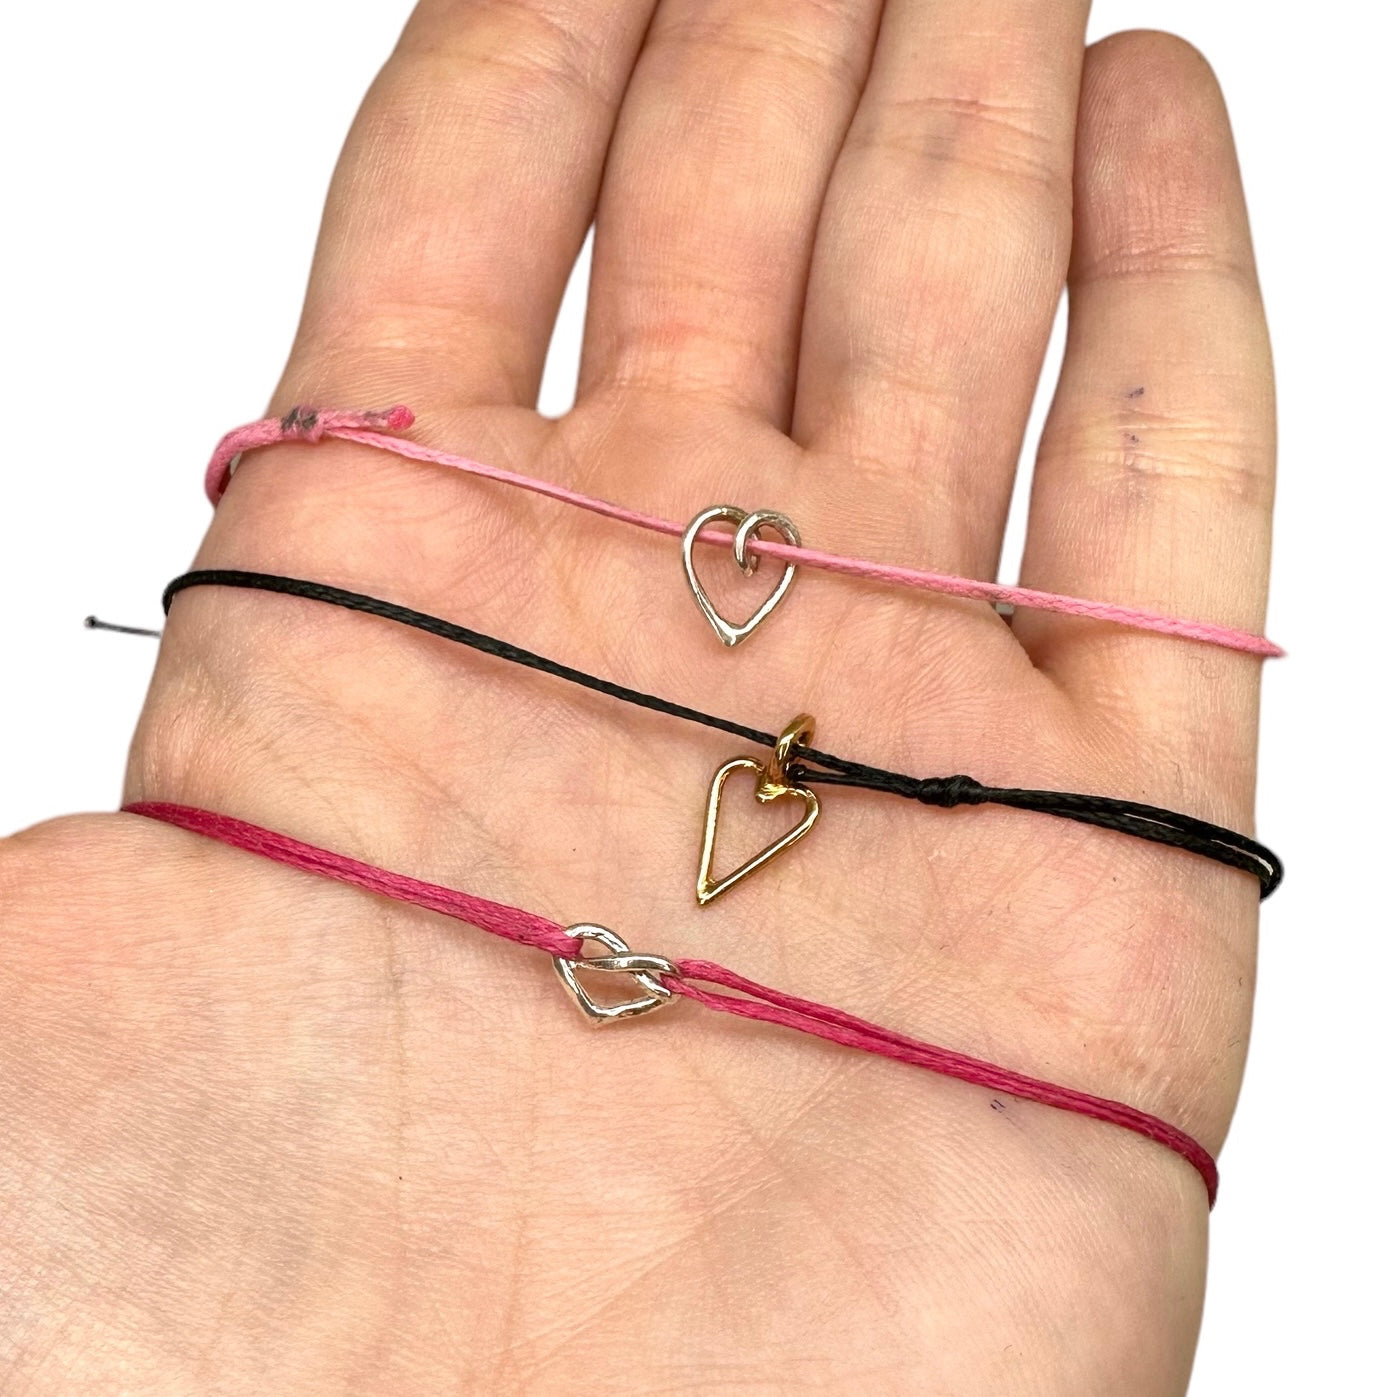 Charity thread bracelet cancer research